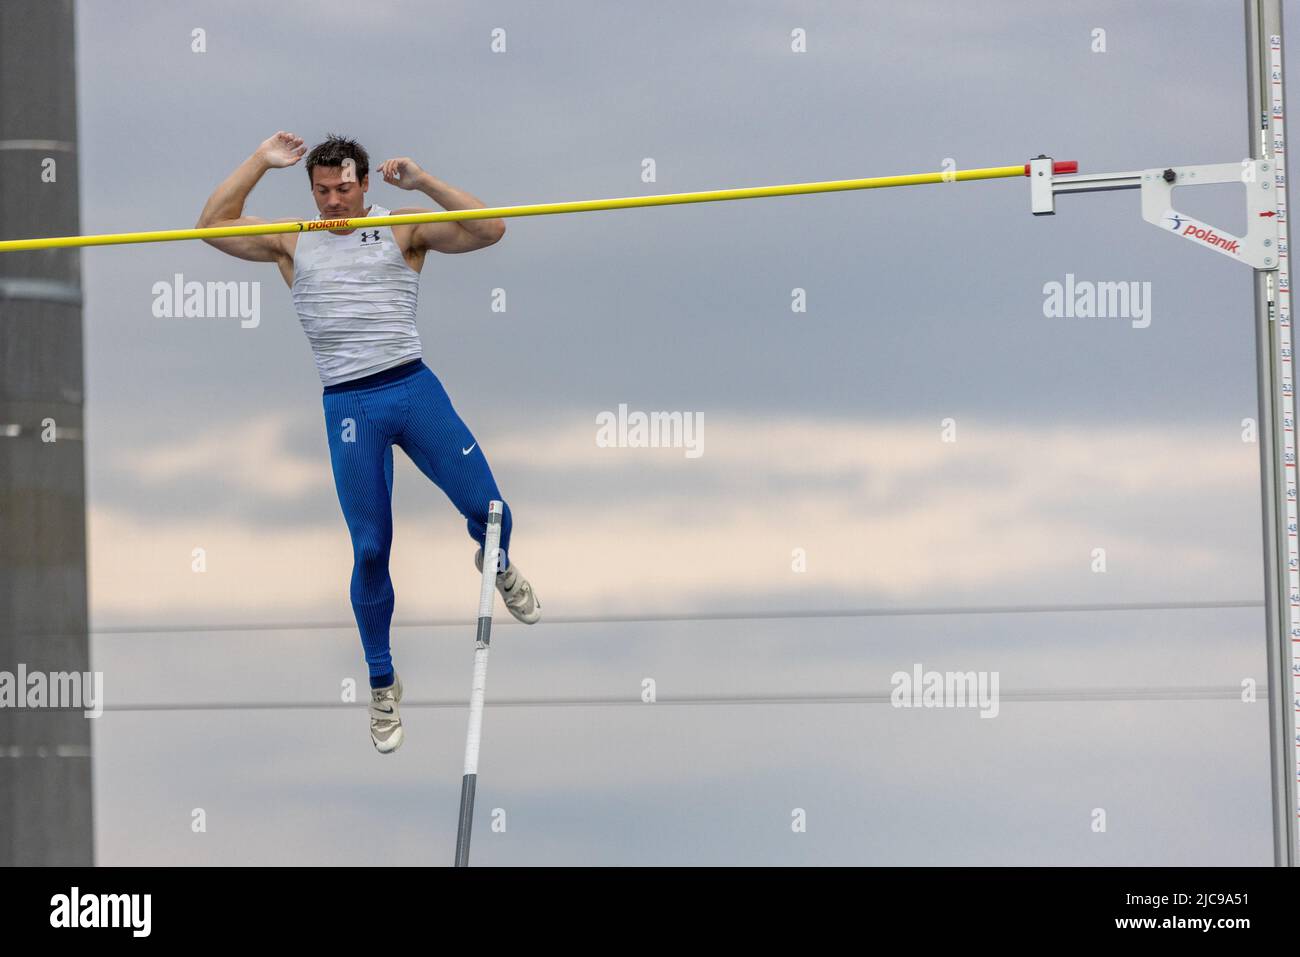 Matt Ludwig of USA, winner of Pole Vault Men competition at the P-T-S athletics meeting in the sports site of x-bionic sphere® in Šamorín, Slovakia, 9. June 2022 Stock Photo